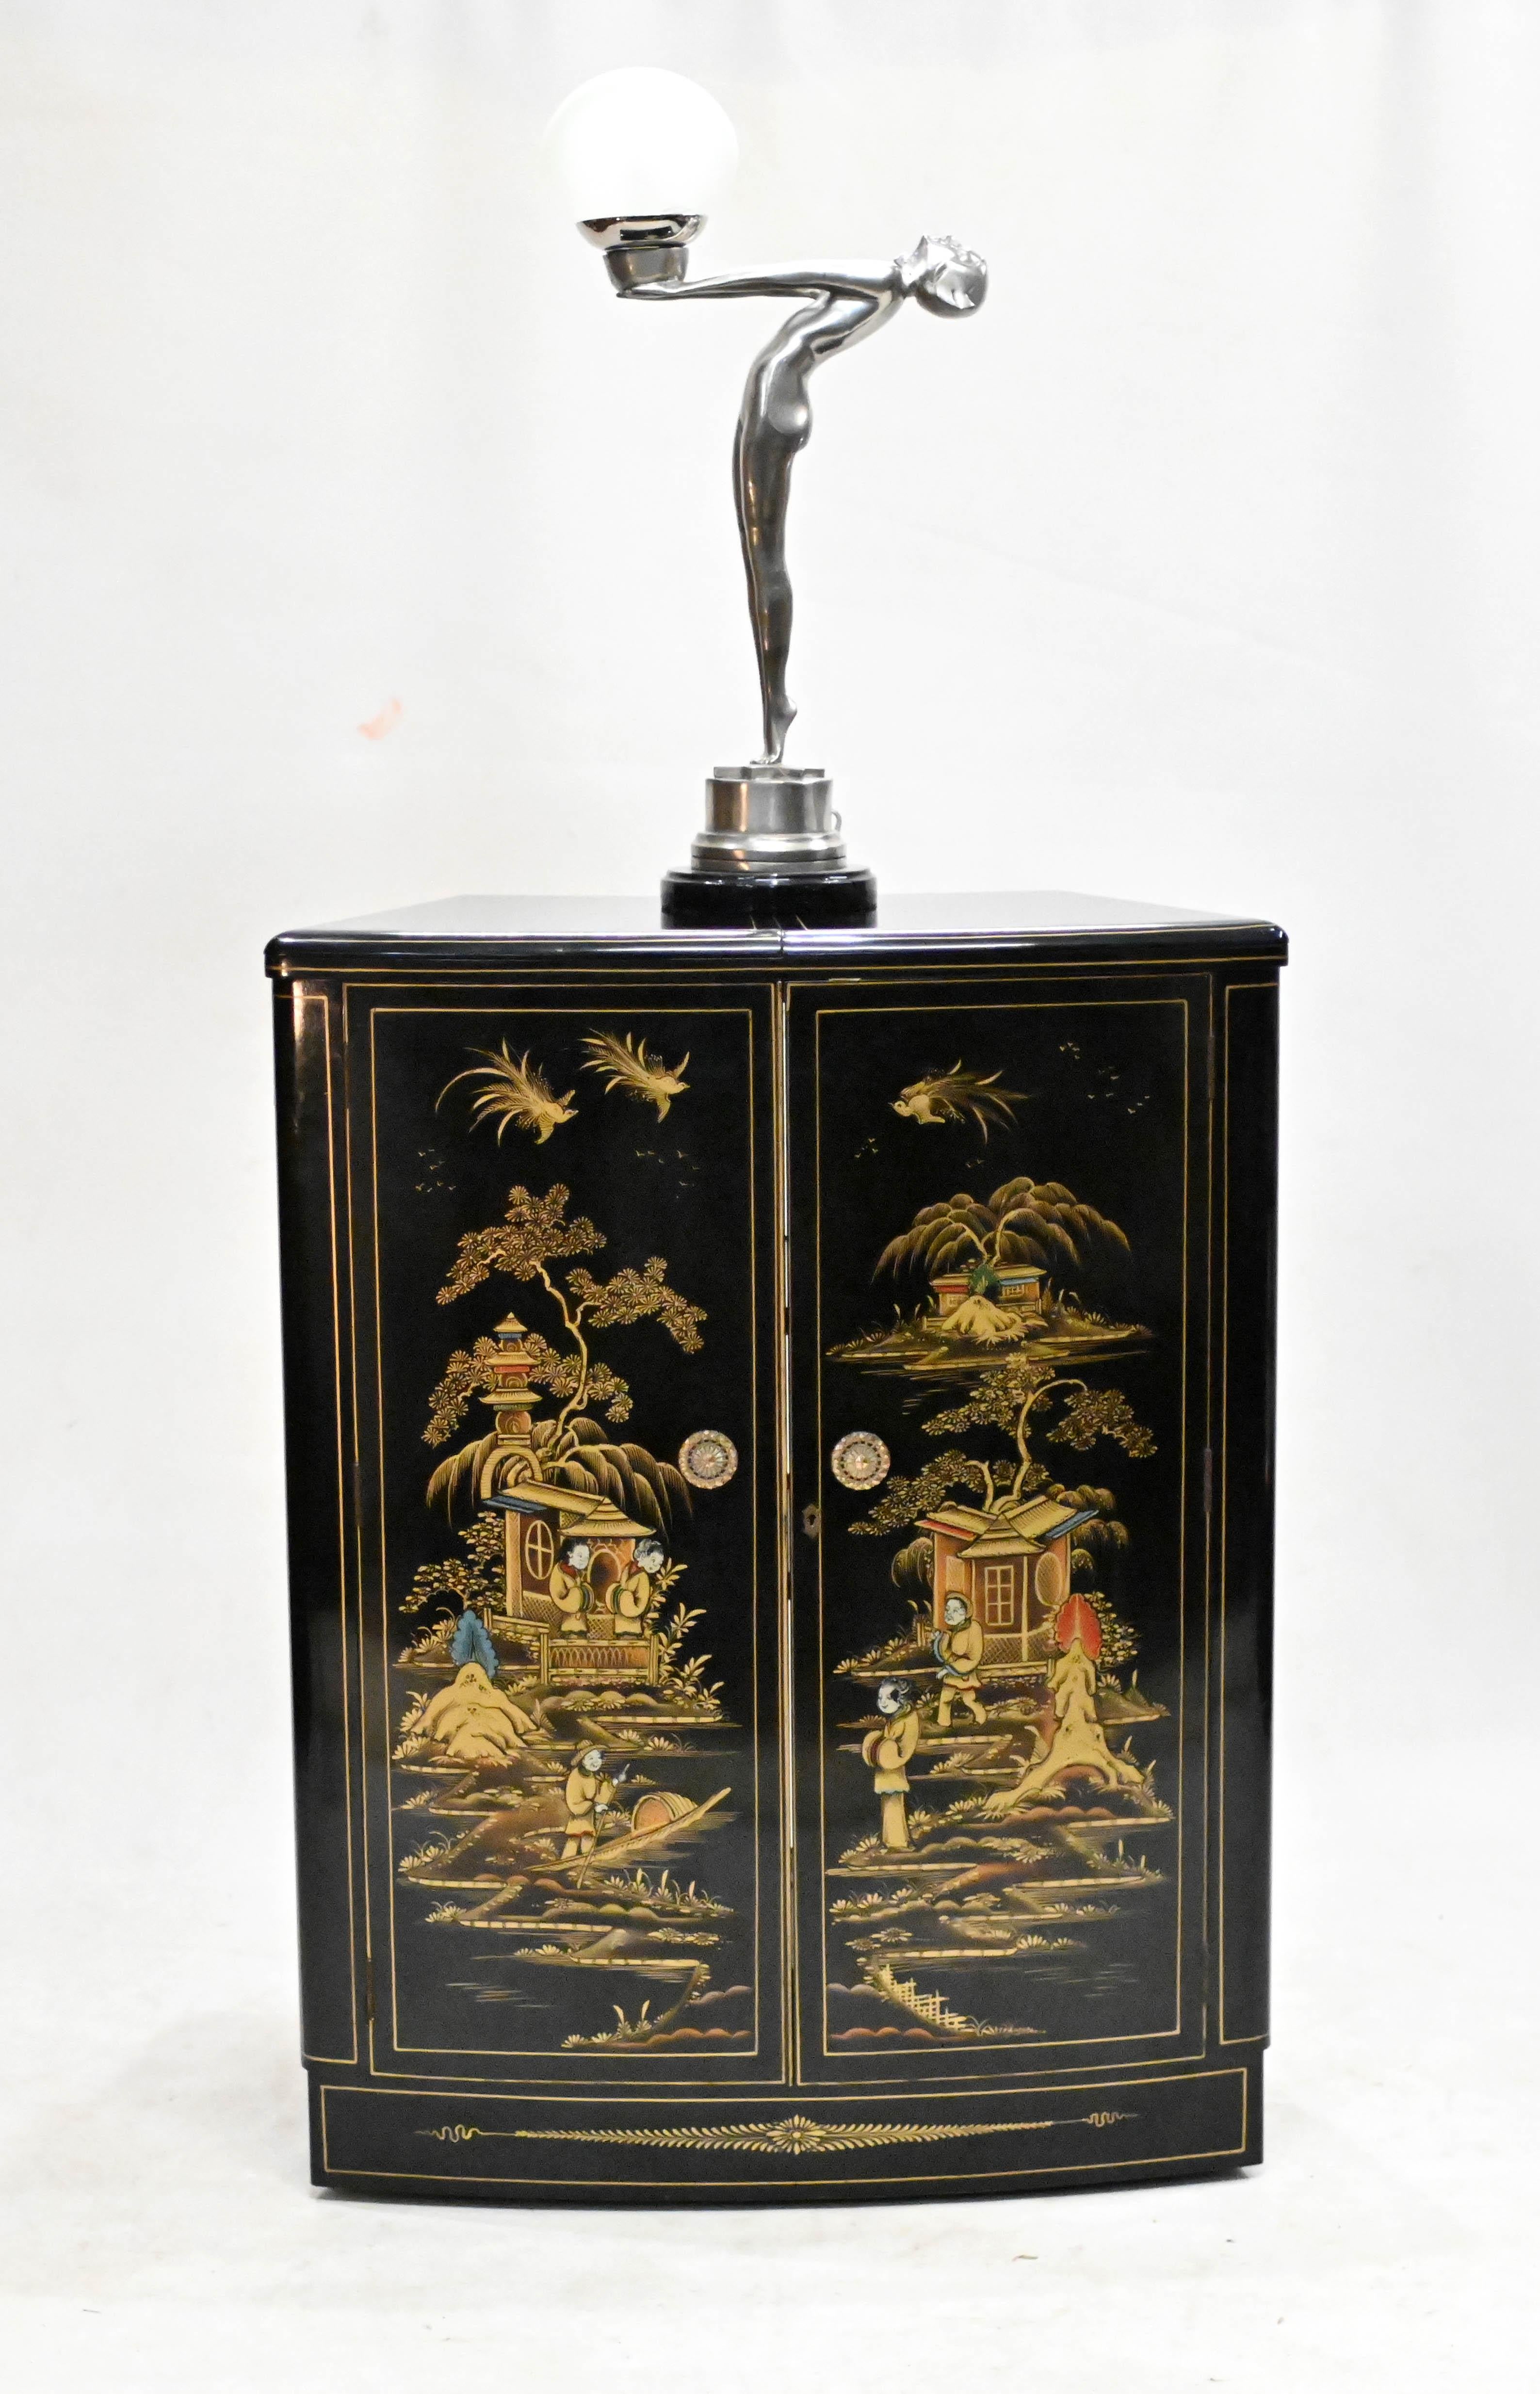 Vintage art deco drinks cabinet with a lacquer finish
Features intricate Chinoiserie to the front showing Chinese figures, pagodas and birds
So detailed in gold and other colours
Doors open to reveal drinks serving area
Also features original lemon